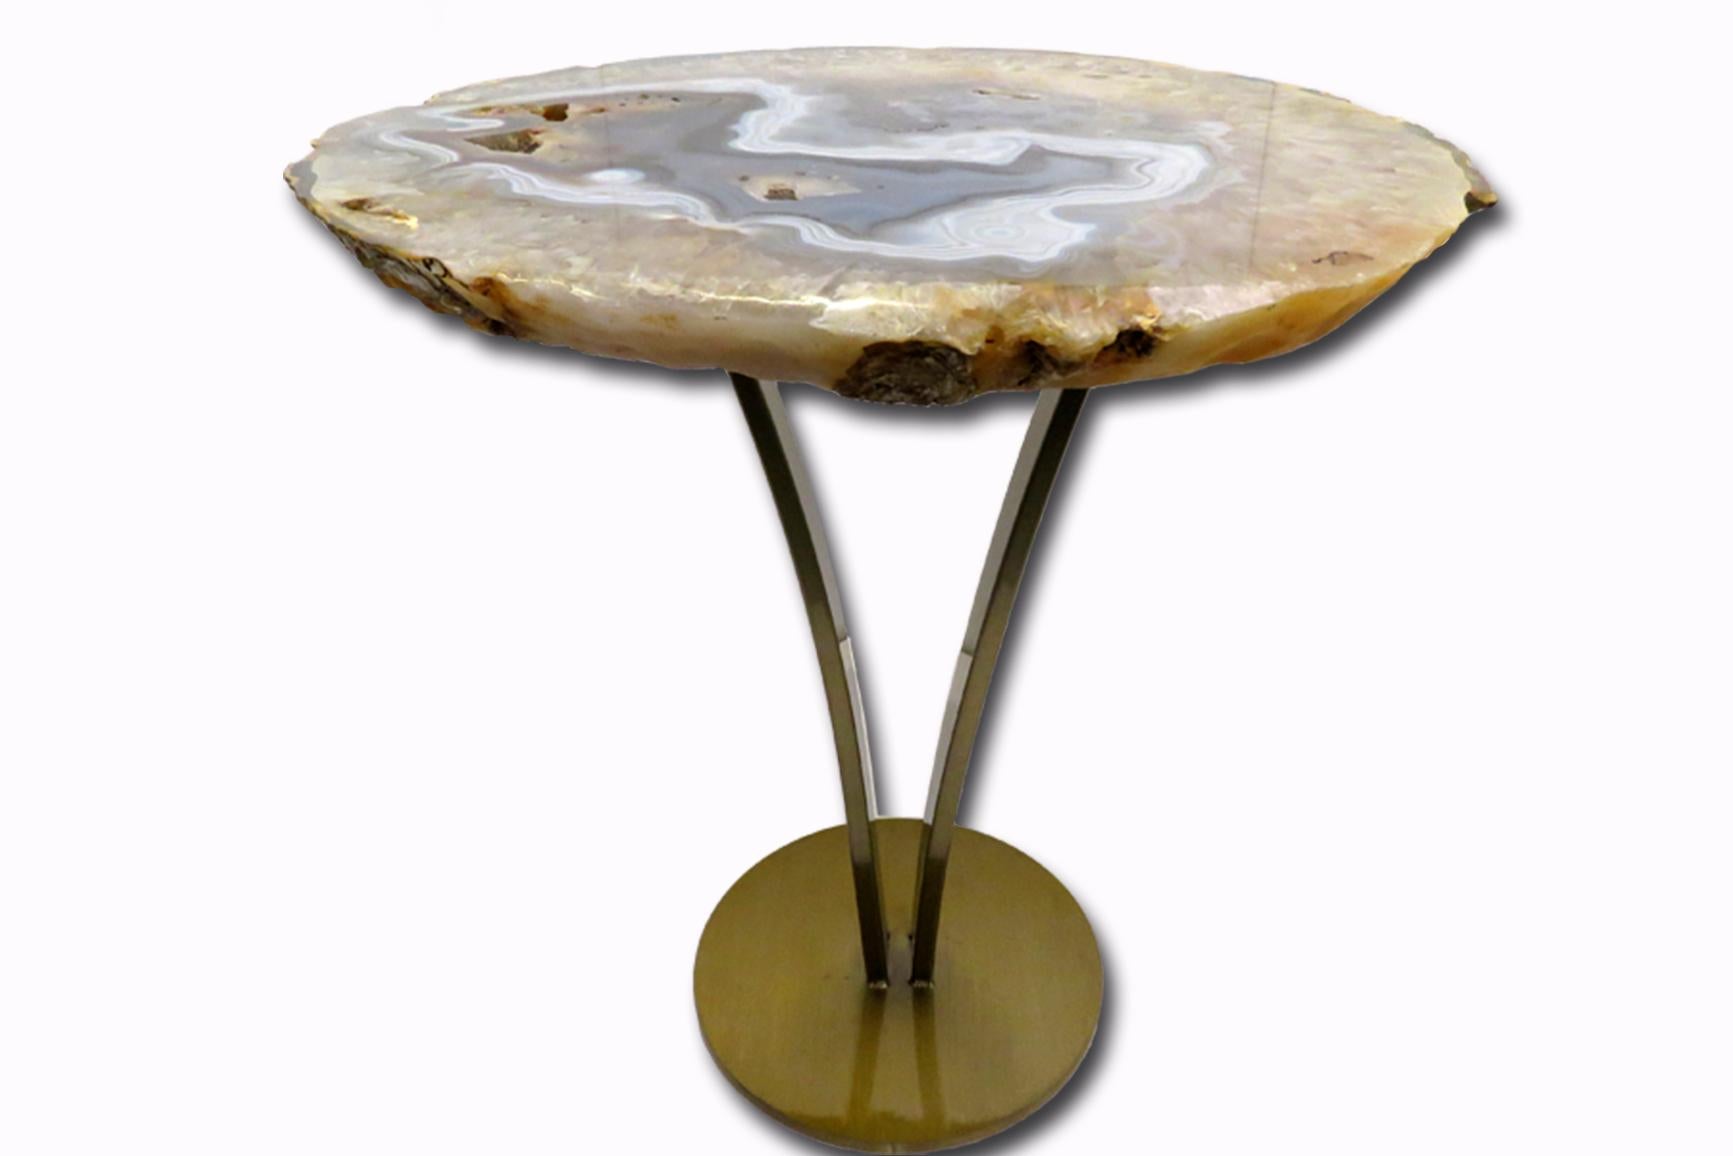 Organic Modern Side or Cocktail Table, Brazilian Agate with Metal Base